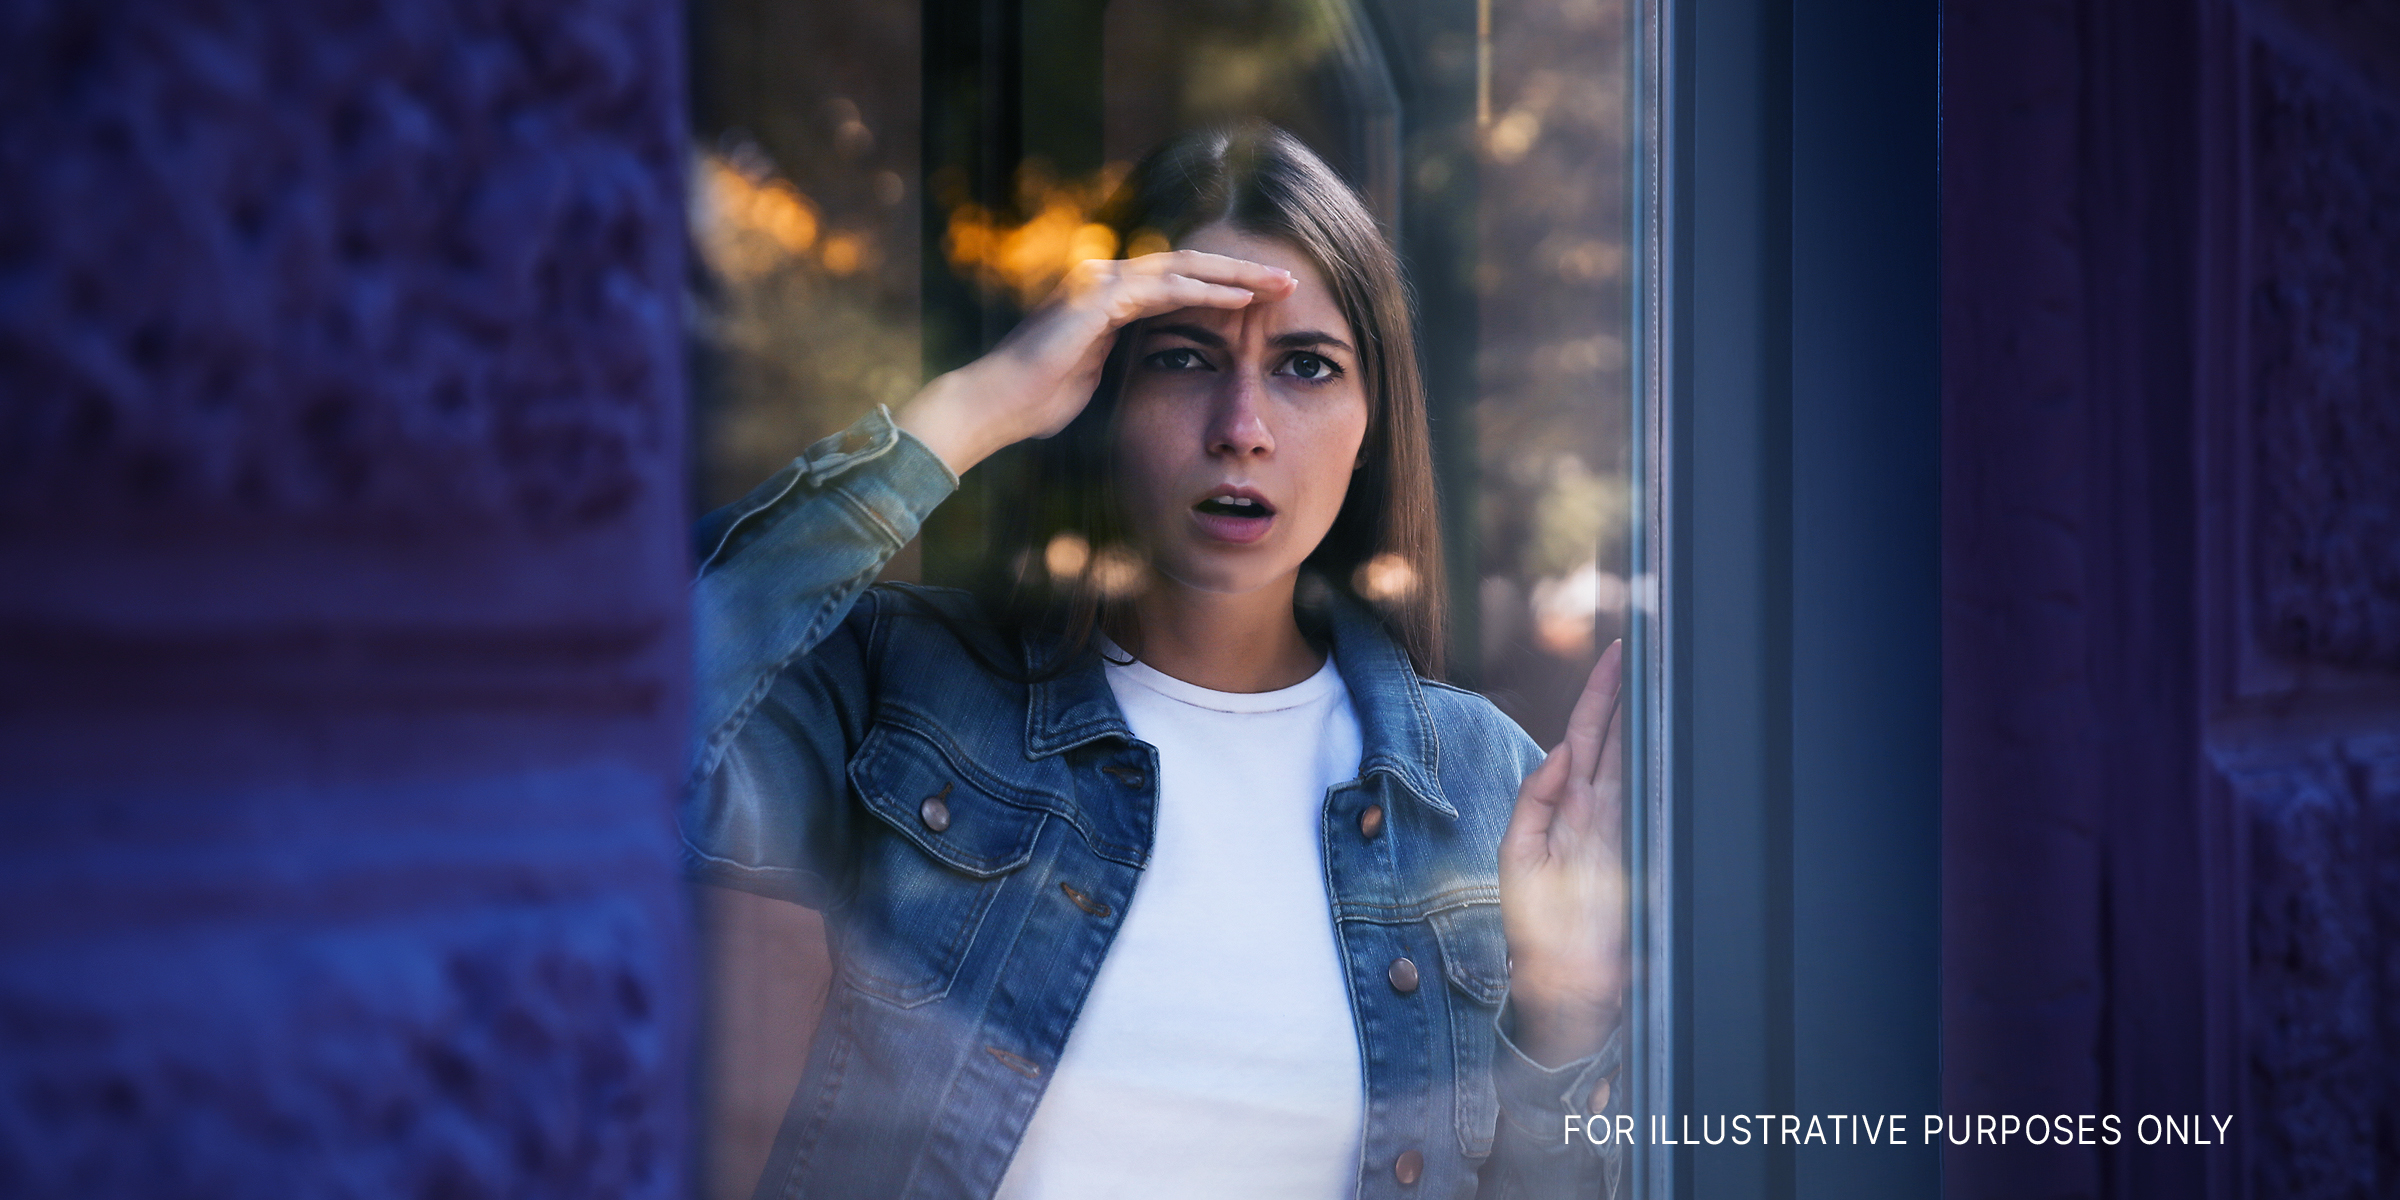 Woman looking at something through window | Source: Shutterstock